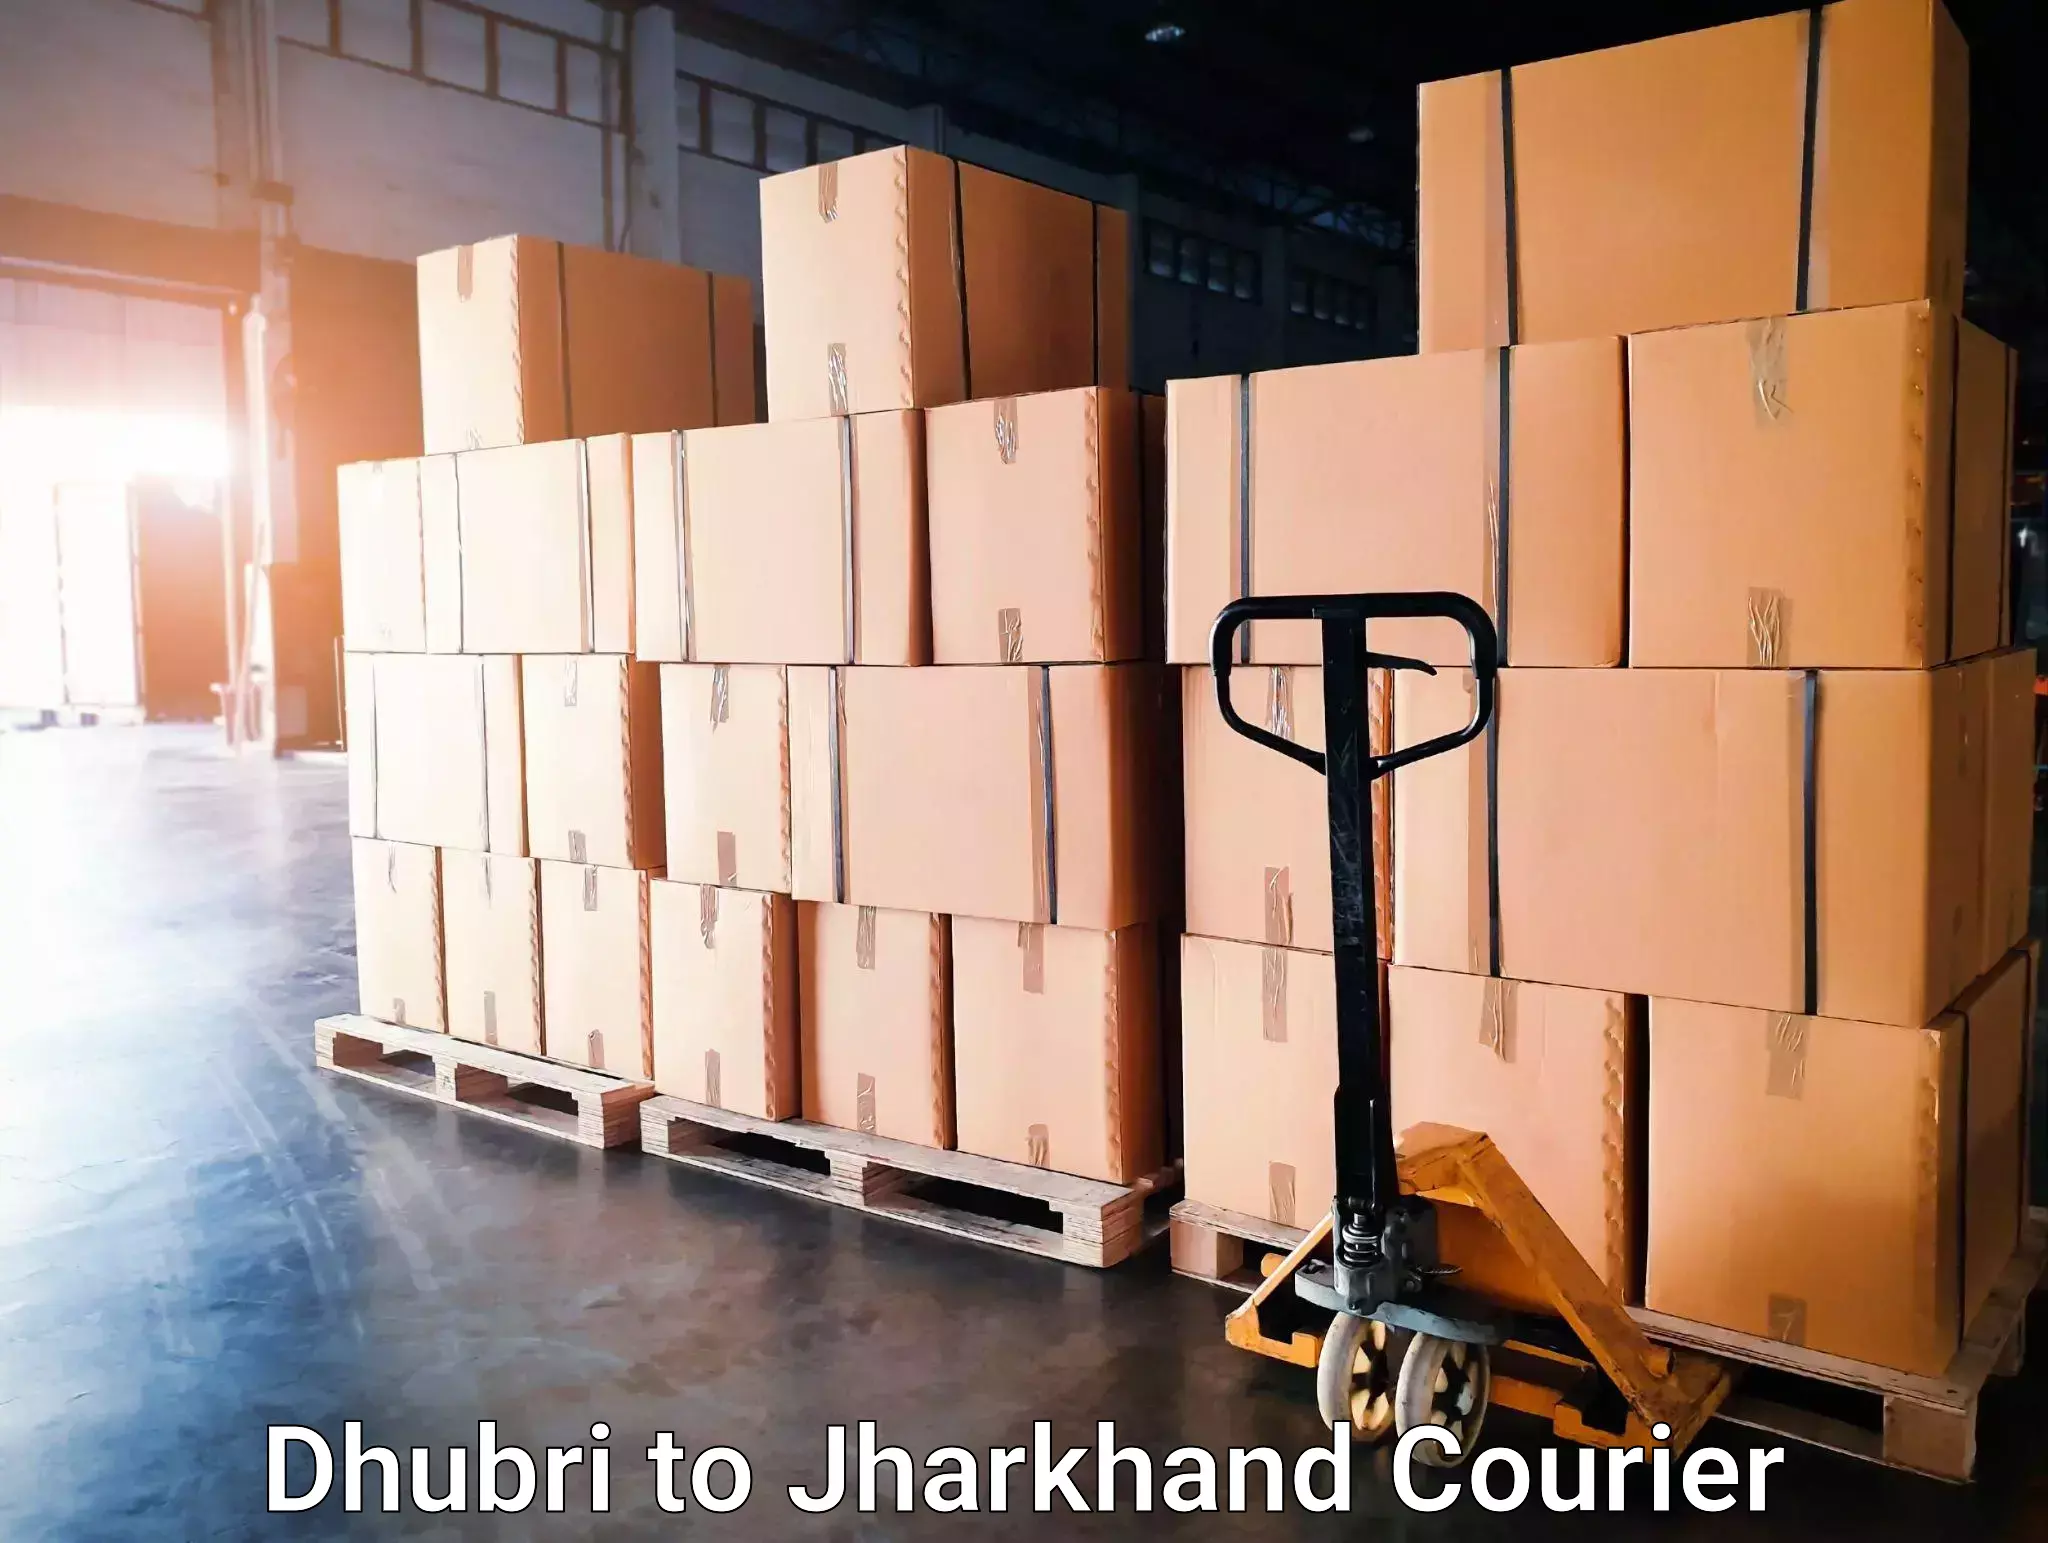 Courier service innovation Dhubri to Dumka